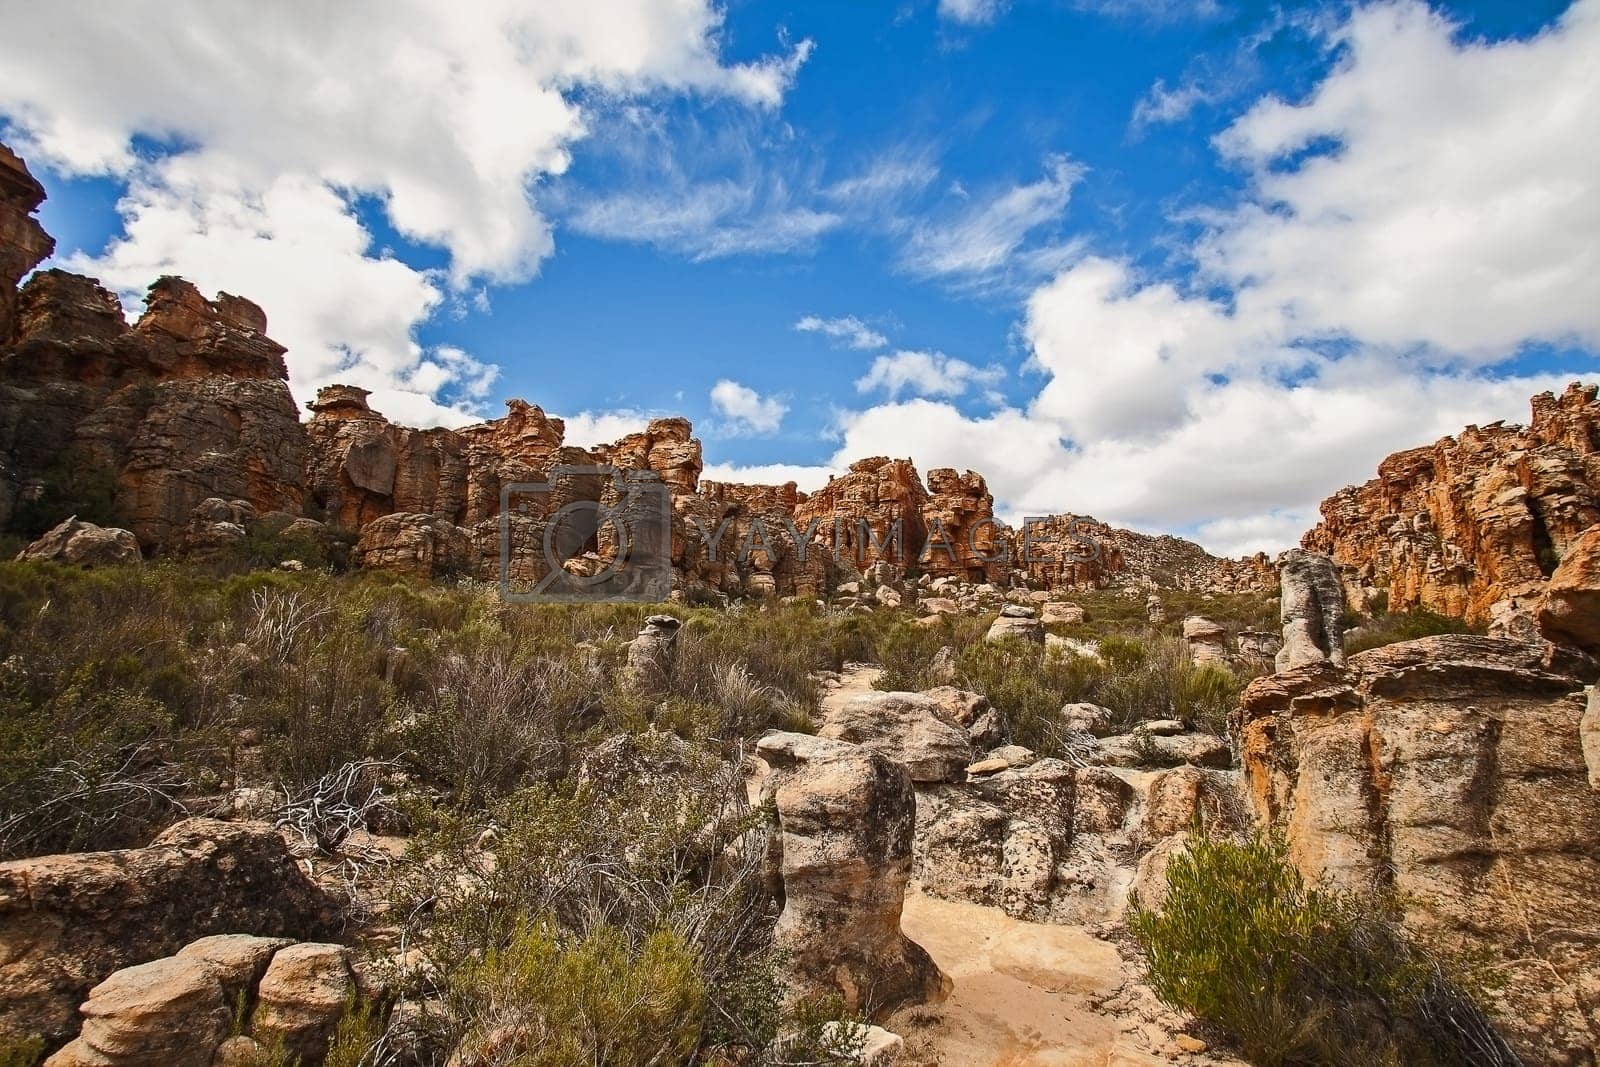 Royalty free image of Cederberg Rock Formations 12806 by kobus_peche